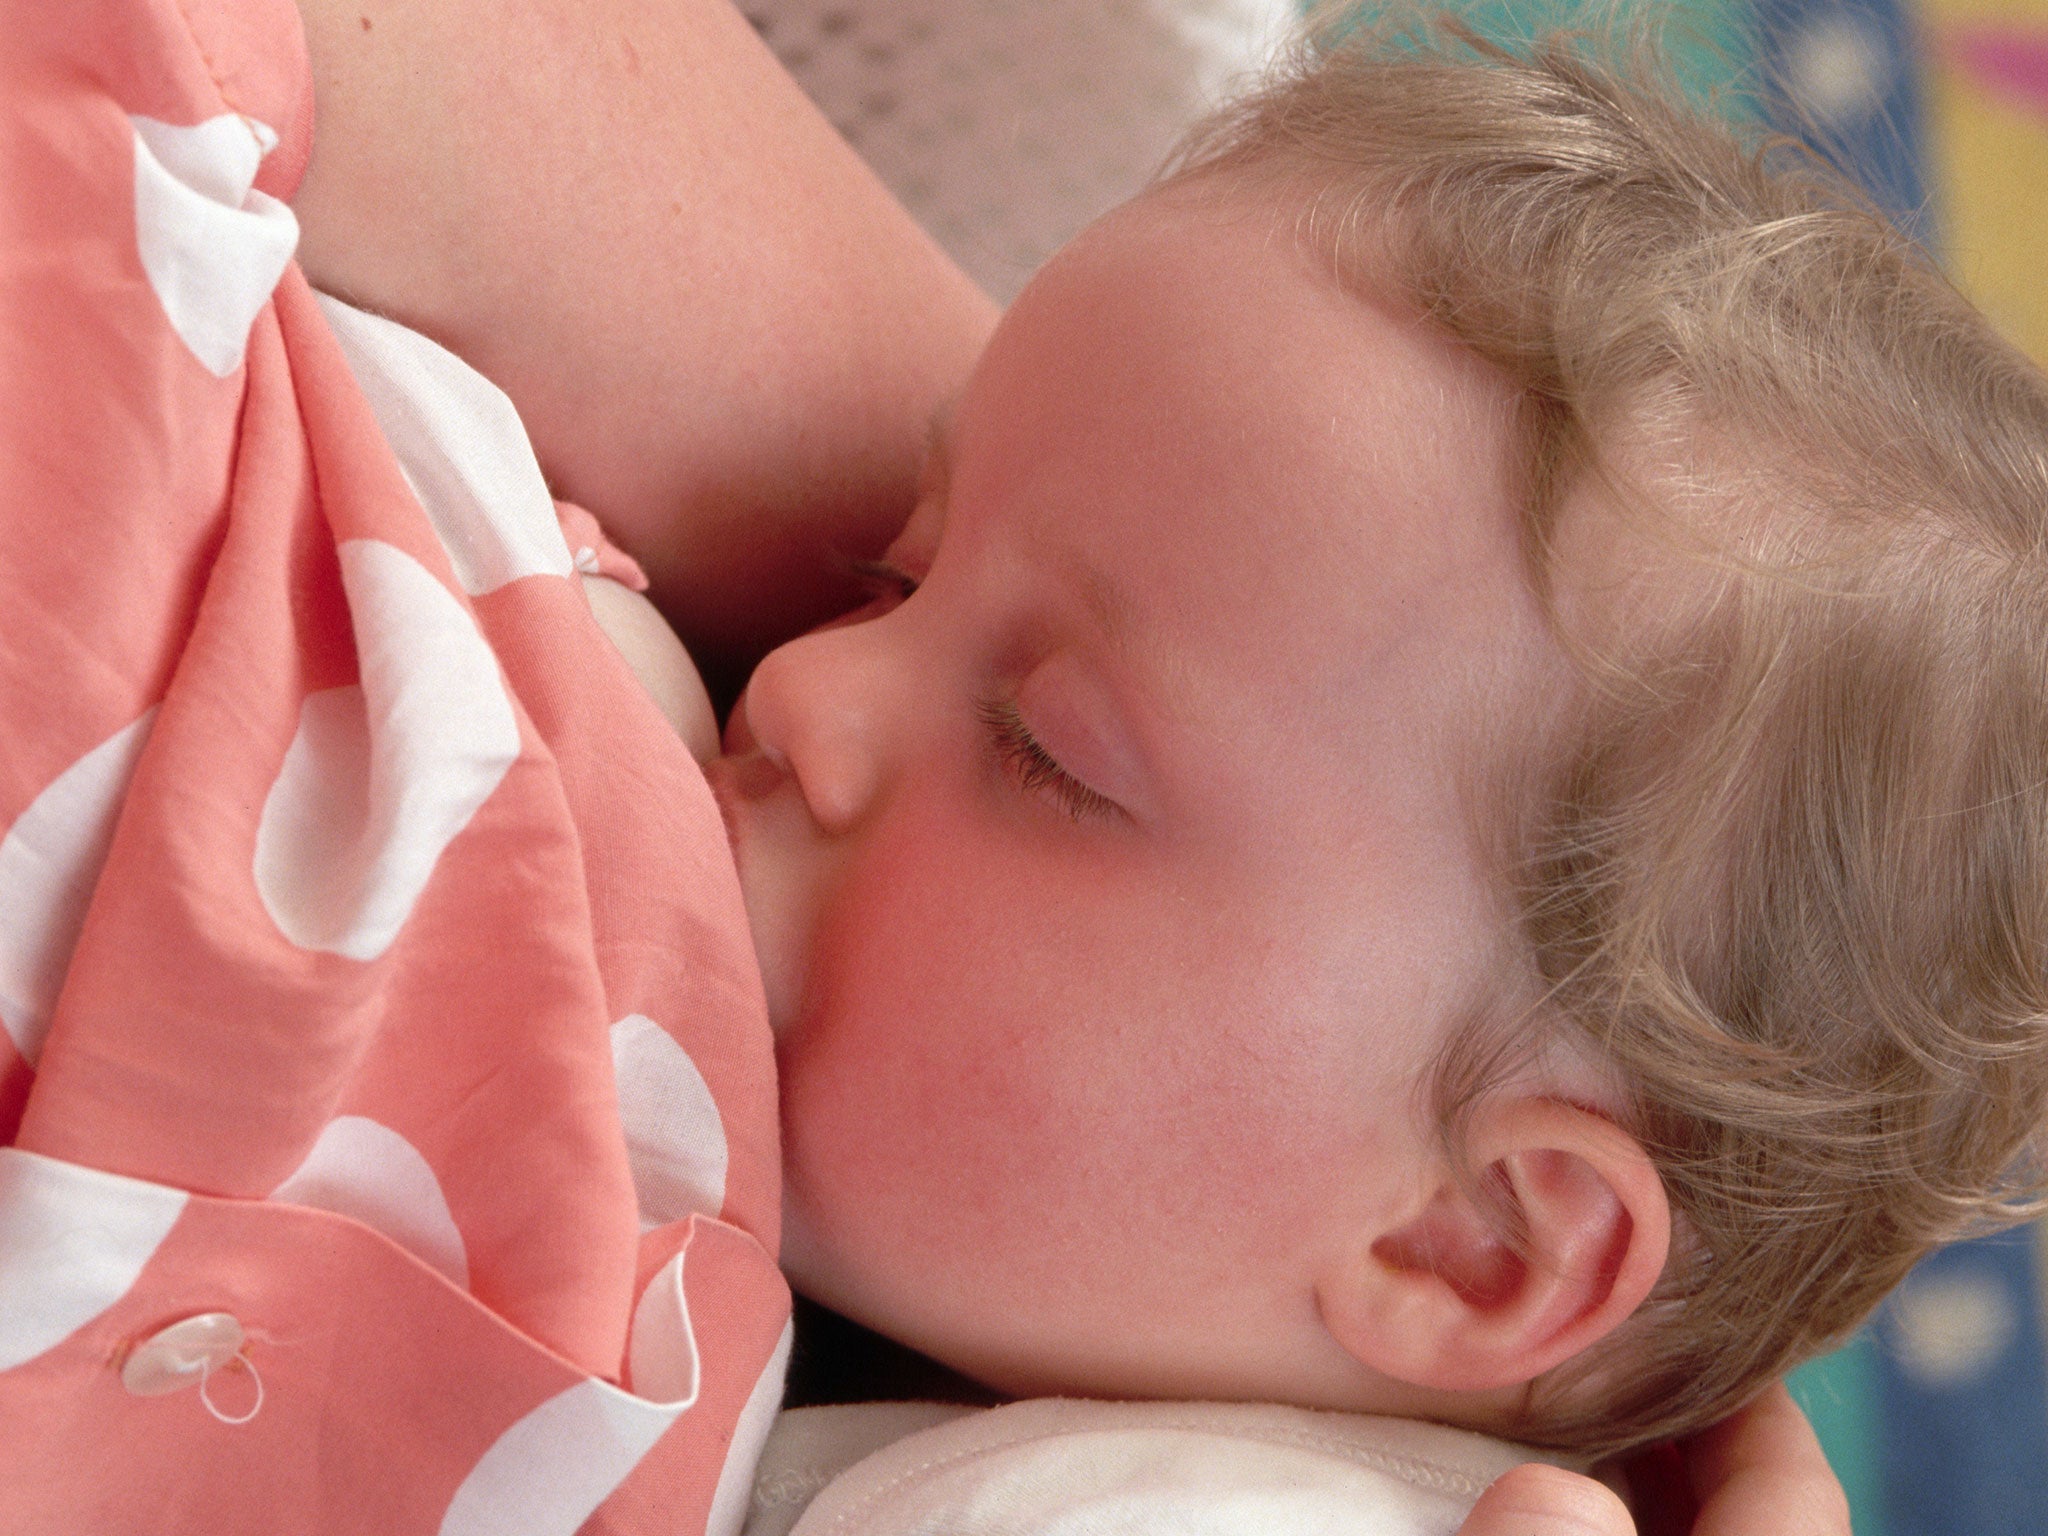 Only 0.5 per cent of British children are breastfed for a year